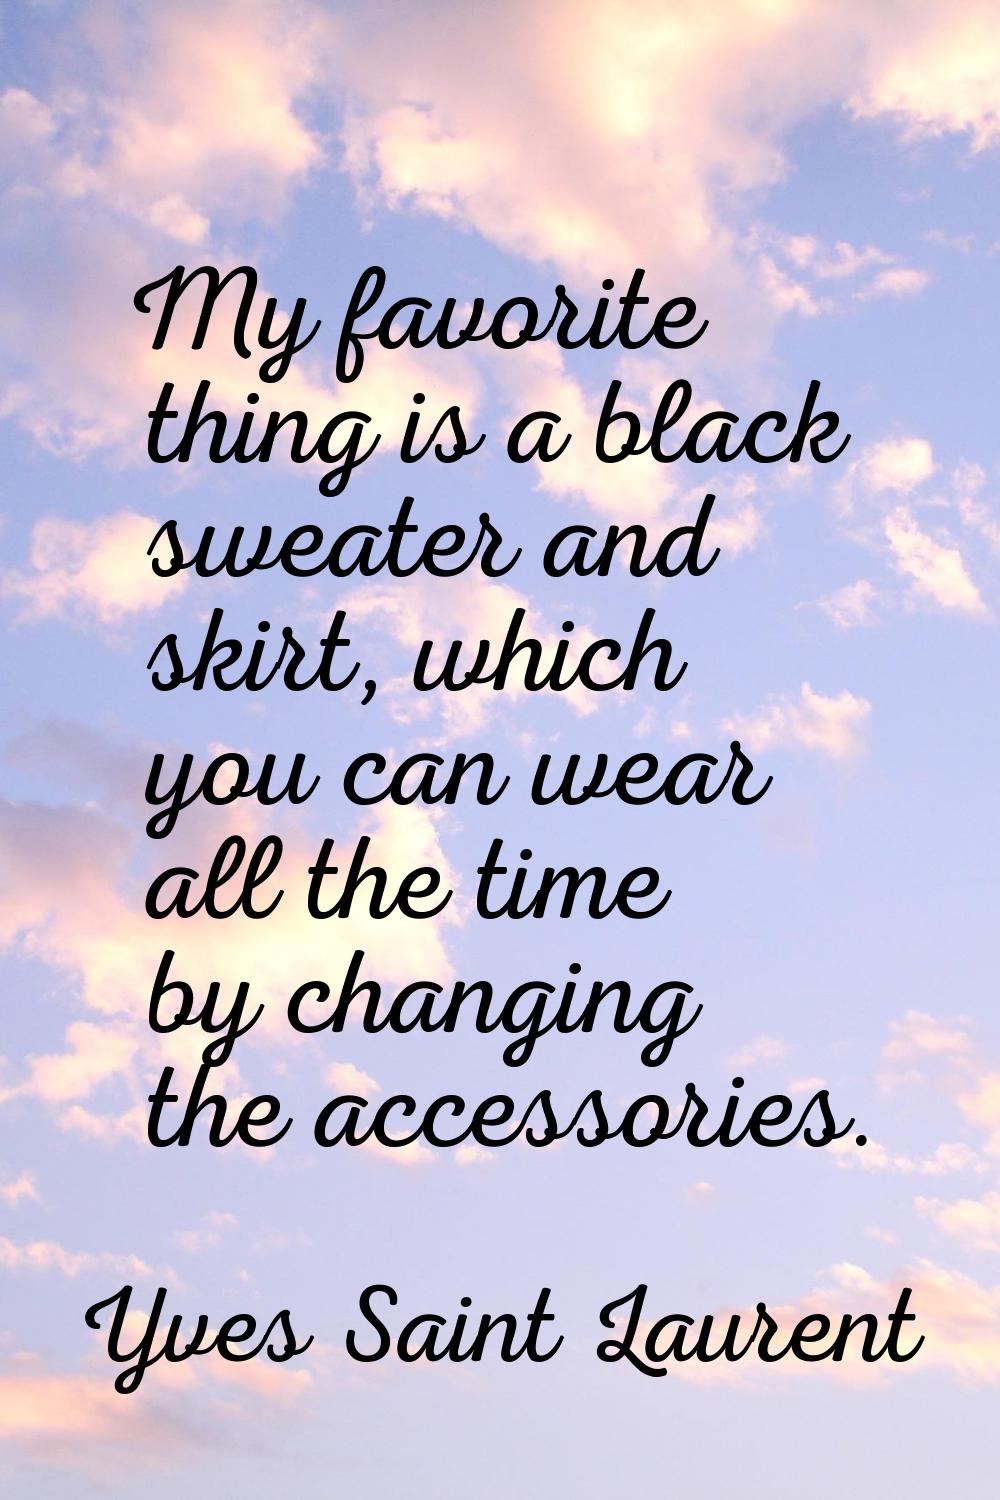 My favorite thing is a black sweater and skirt, which you can wear all the time by changing the acc